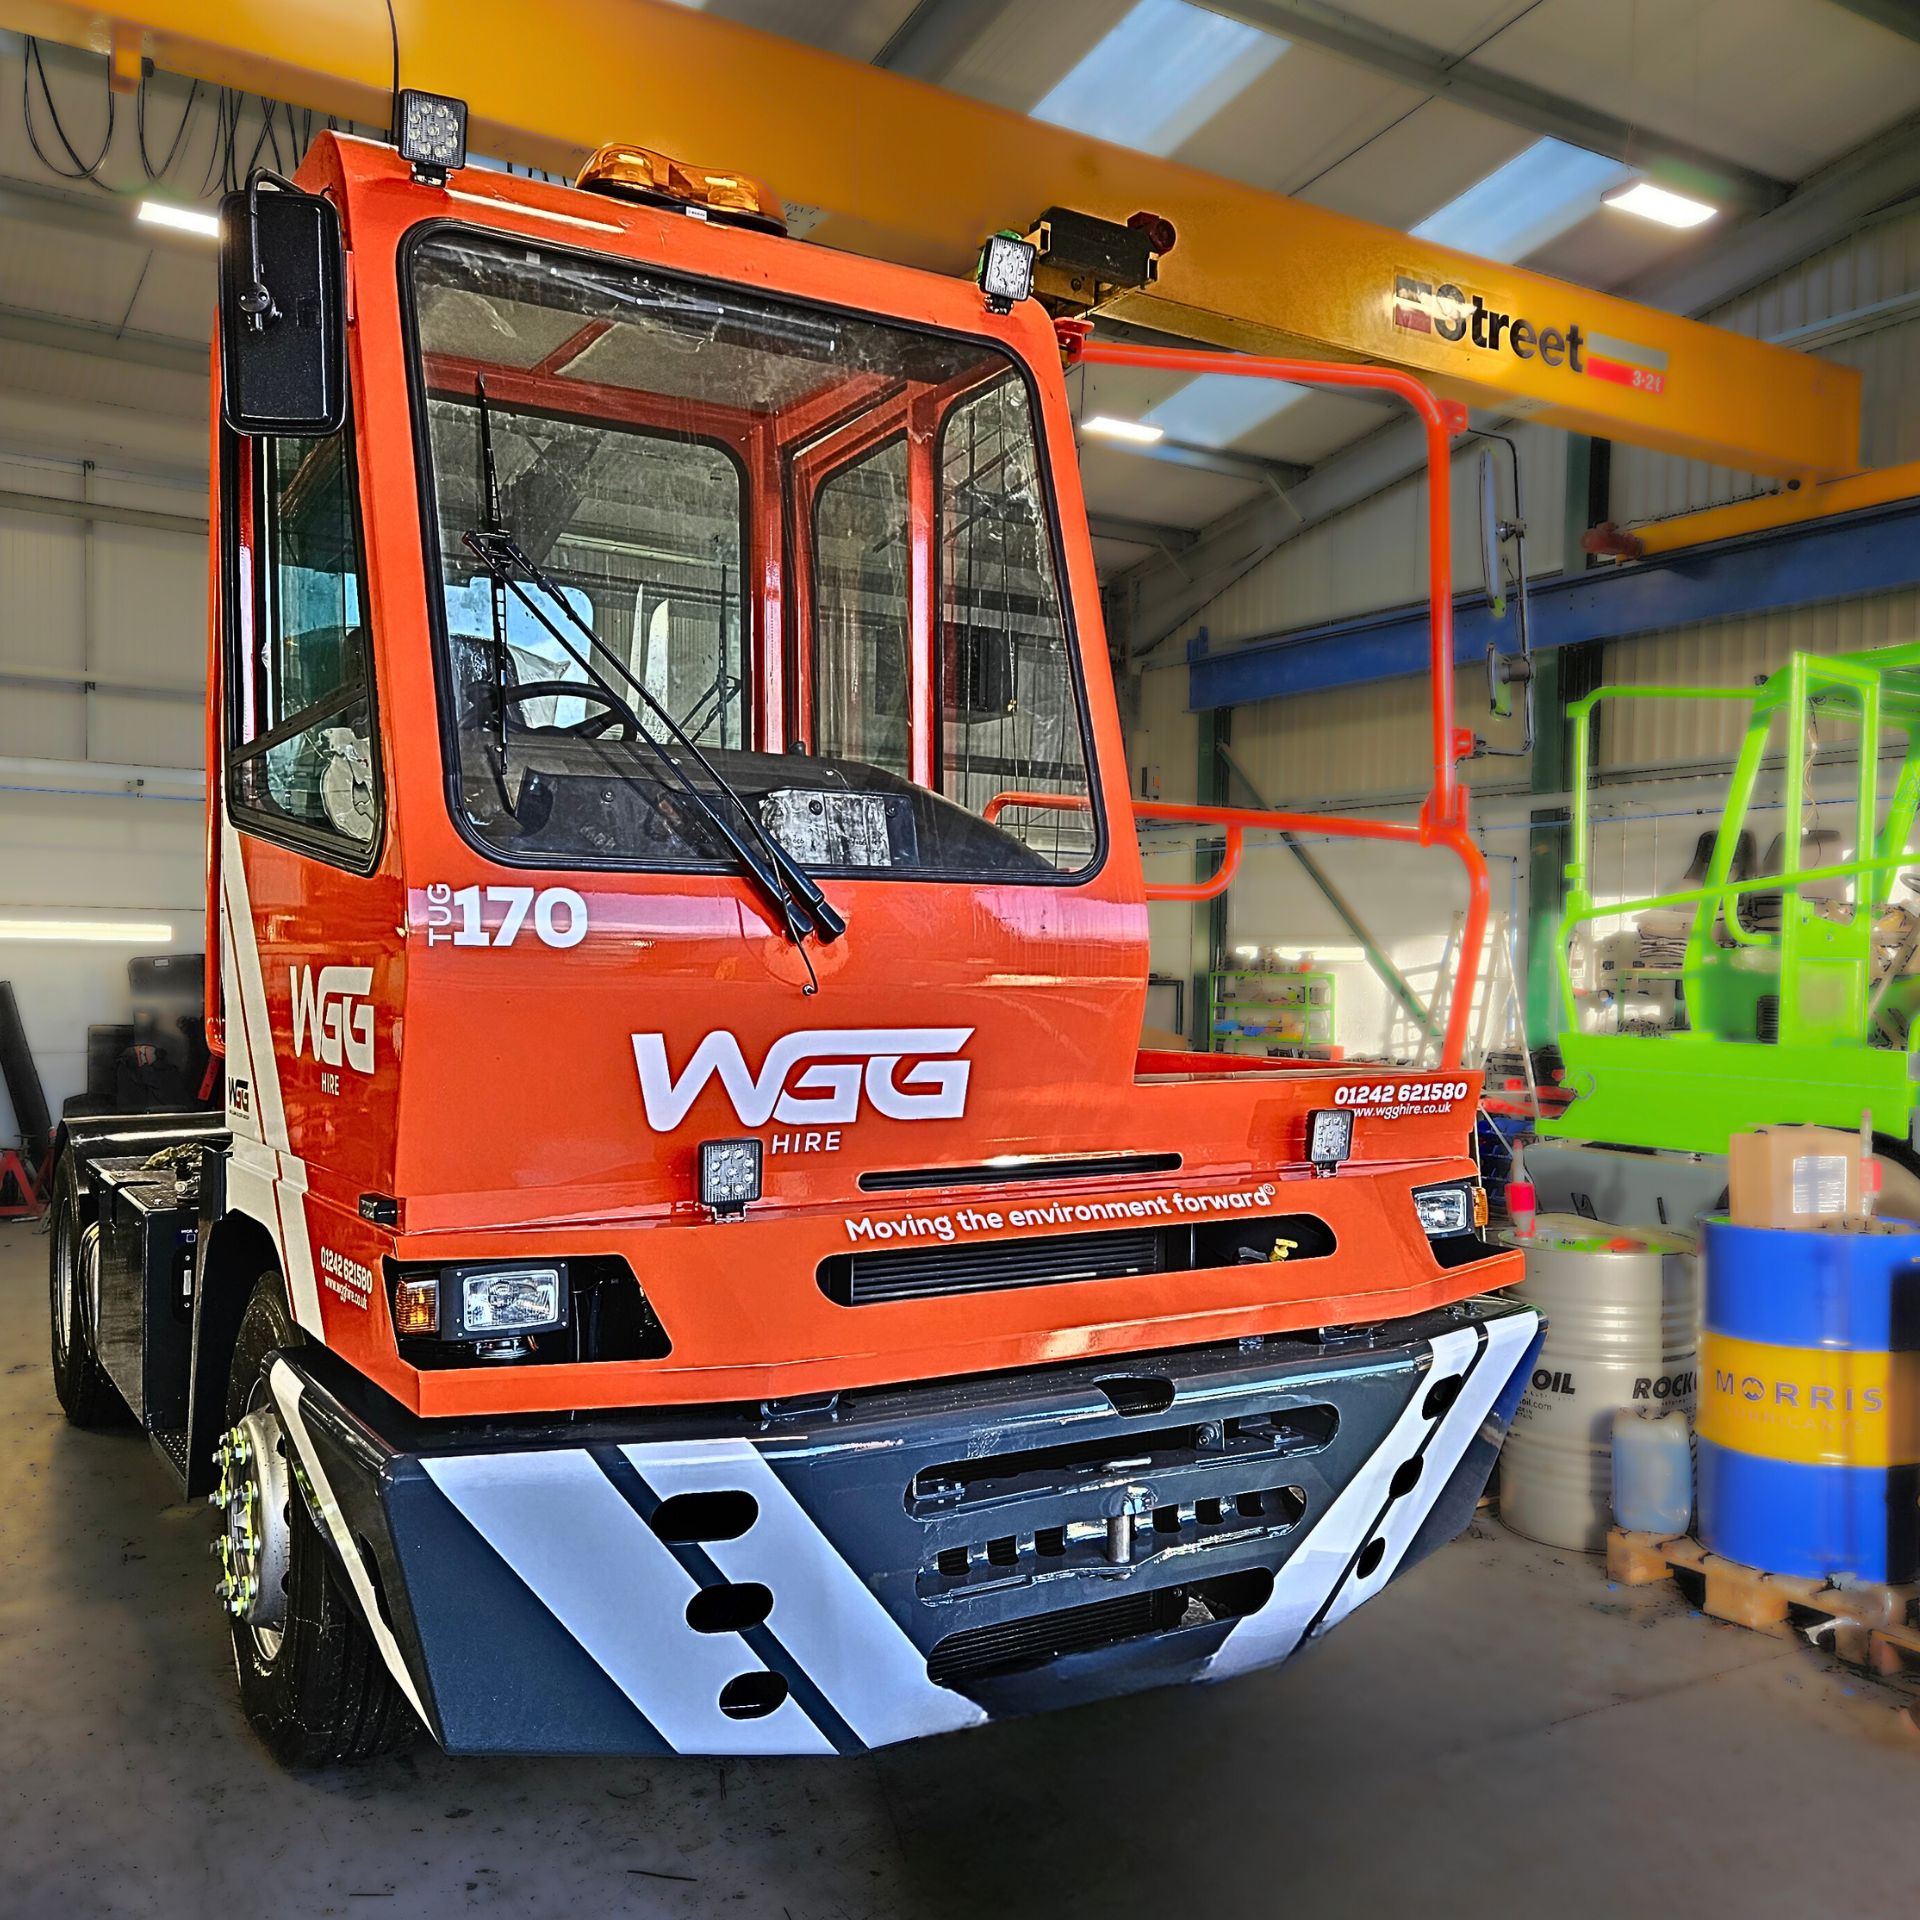 A front view of an orange tug vehicle in a garage